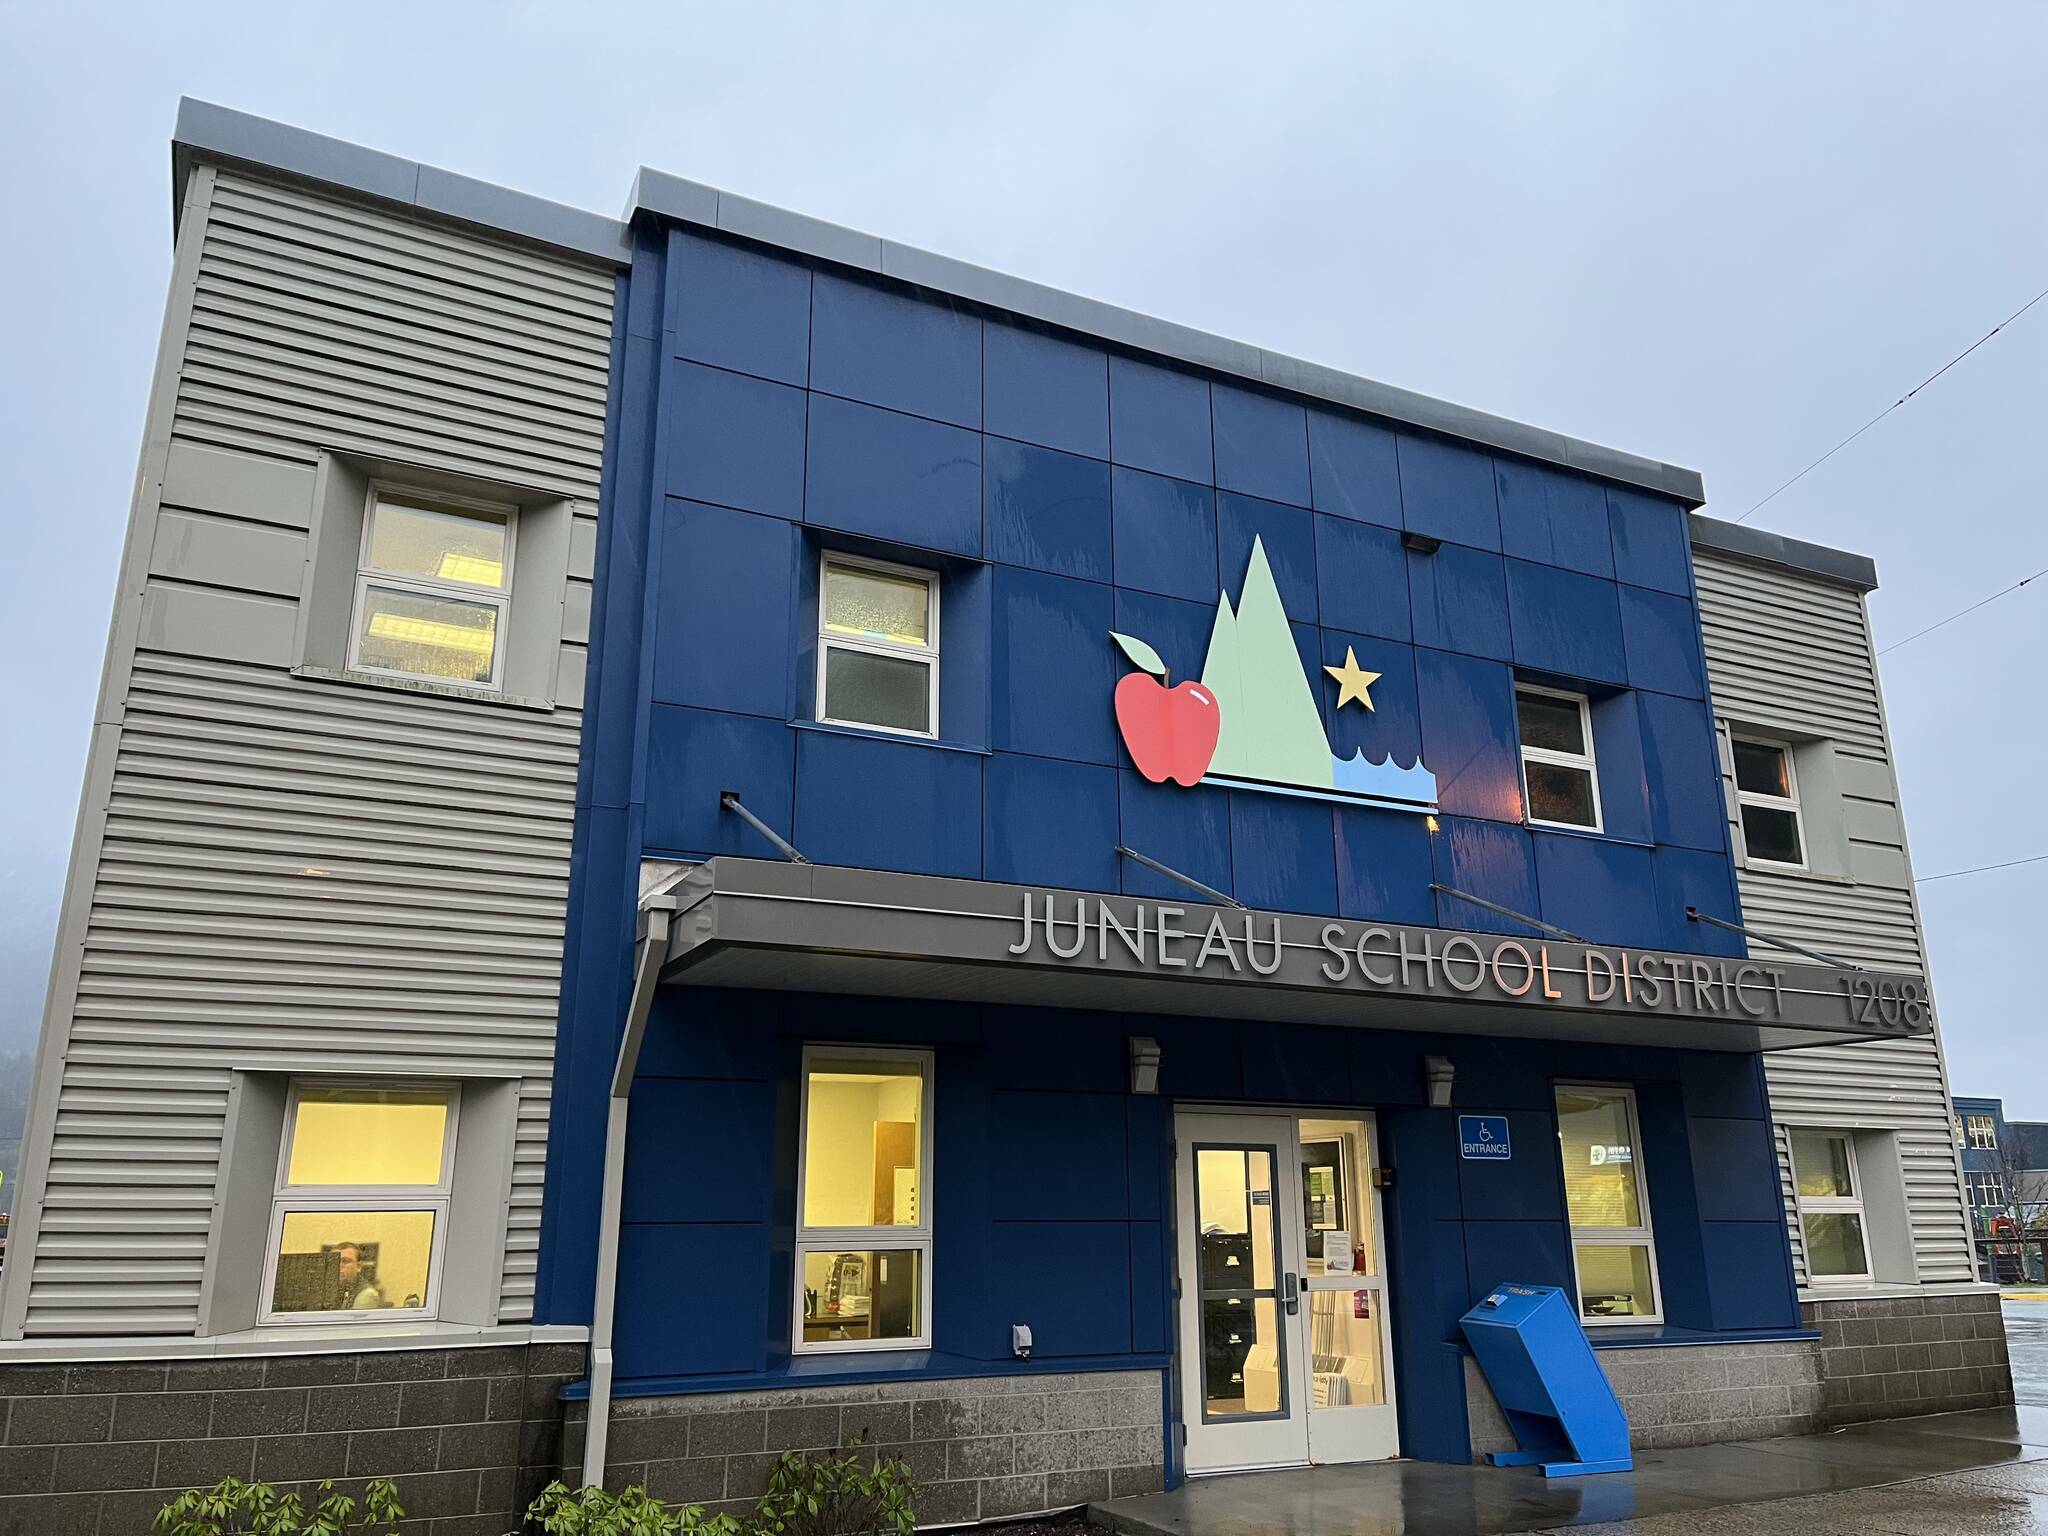 The Juneau School District is entangled in a dispute with the Alaska Department of Education and Early Development about supplemental funds the city provides for what the district calls non-instructional purposes such as after-school programs and pupil transportation. (Jonson Kuhn / Juneau Empire file photo)